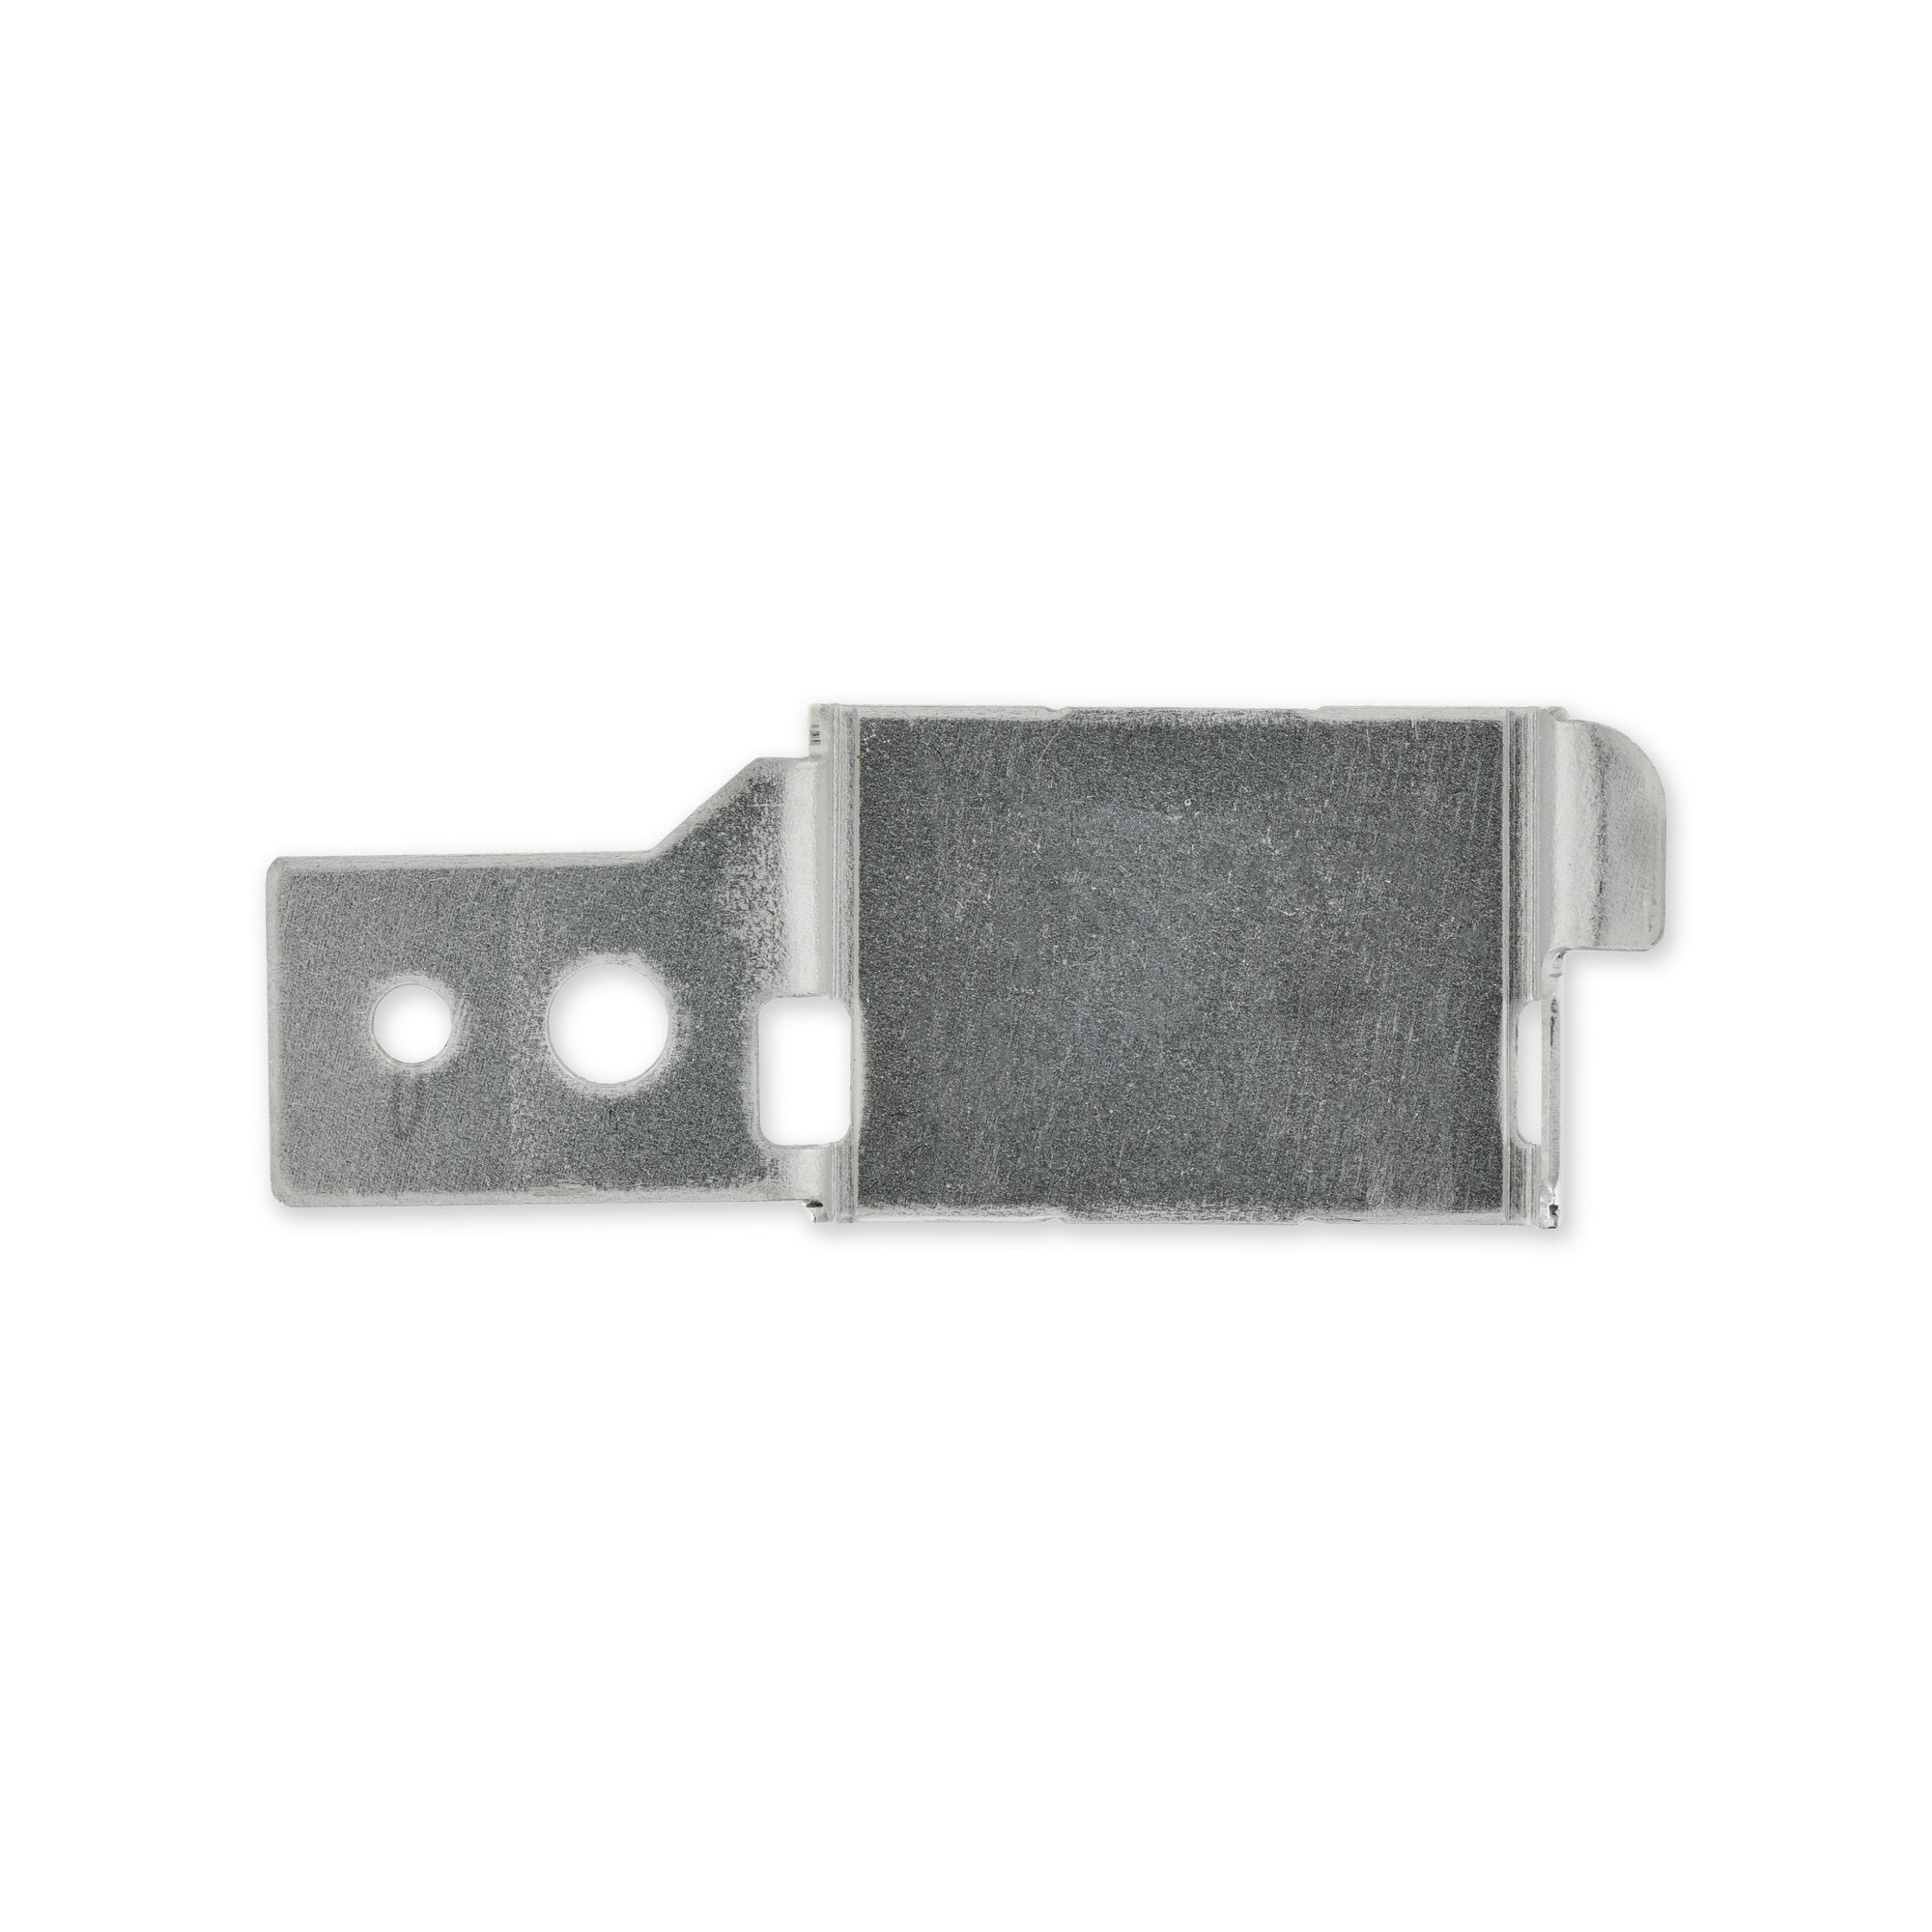 Lenovo ThinkPad T460s and T470s DC-IN Port Bracket New